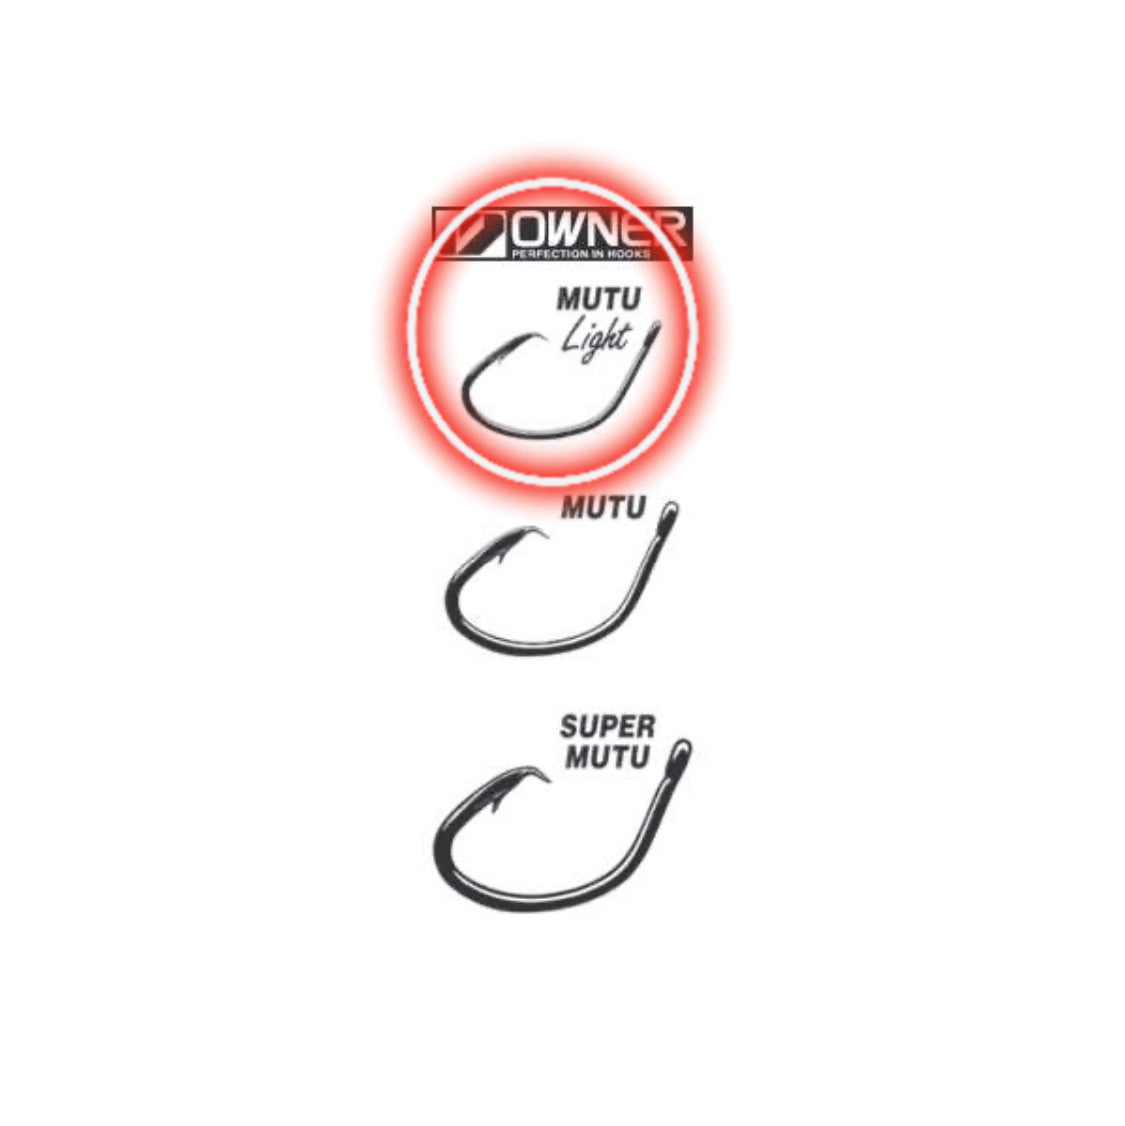 Owner Mutu Light Circle Hook Size 2 (8 Pack) – Trails & Tackle